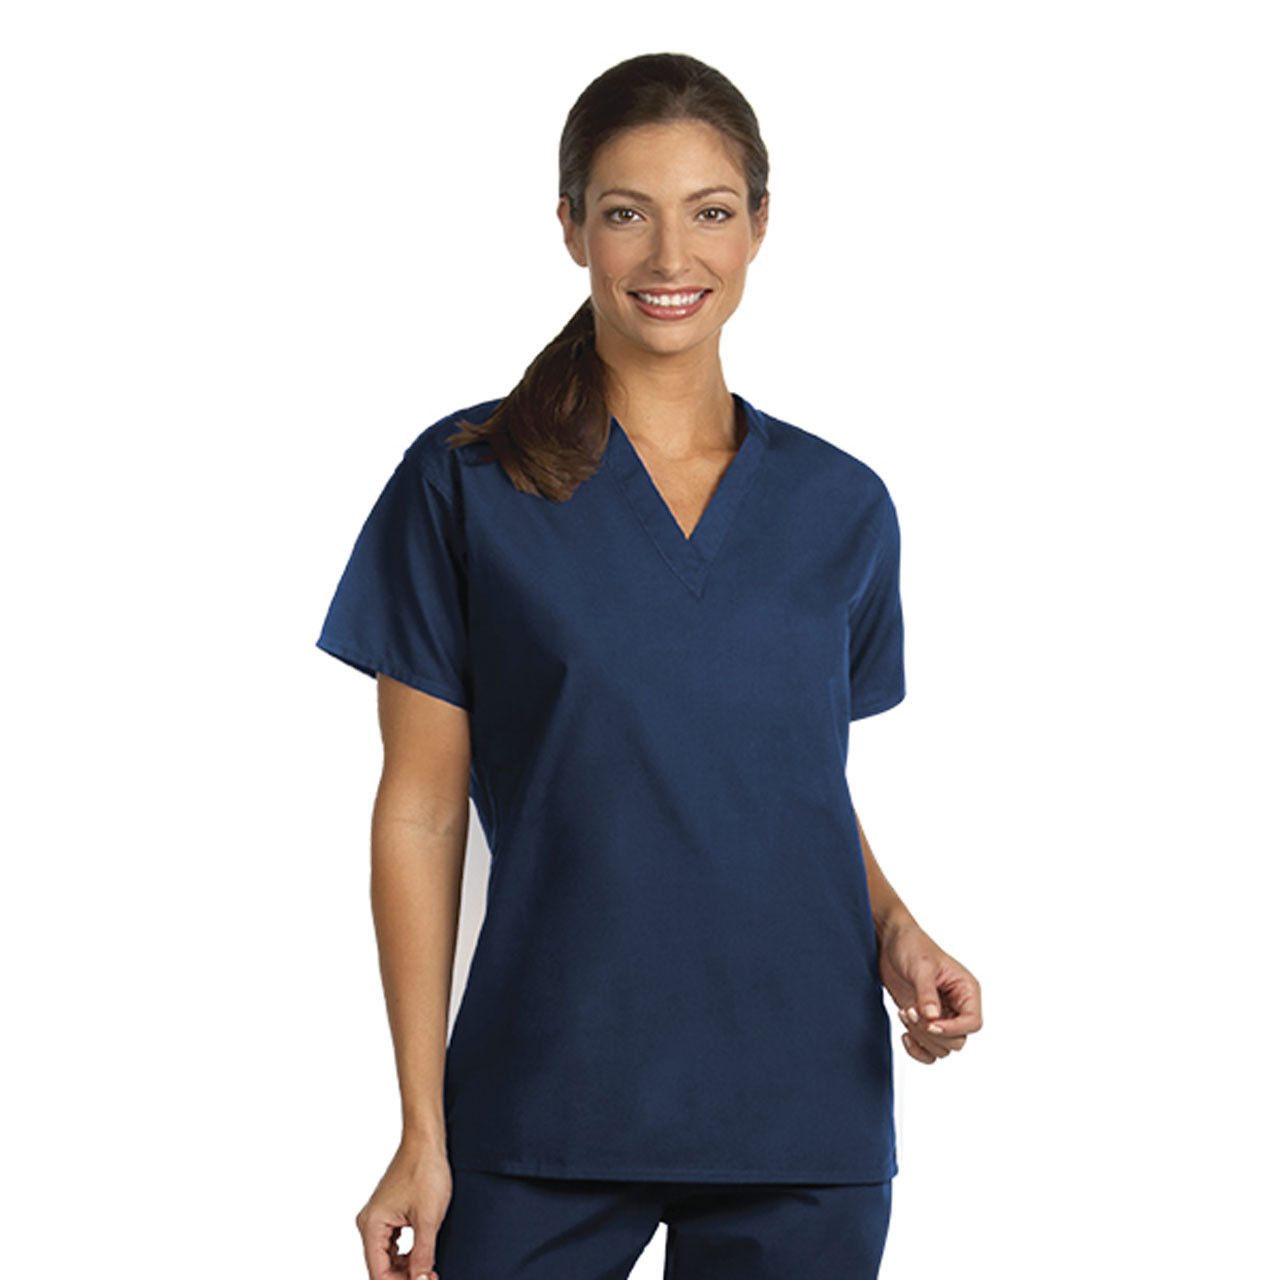 How is the sleeve designed on these navy blue nursing scrubs?